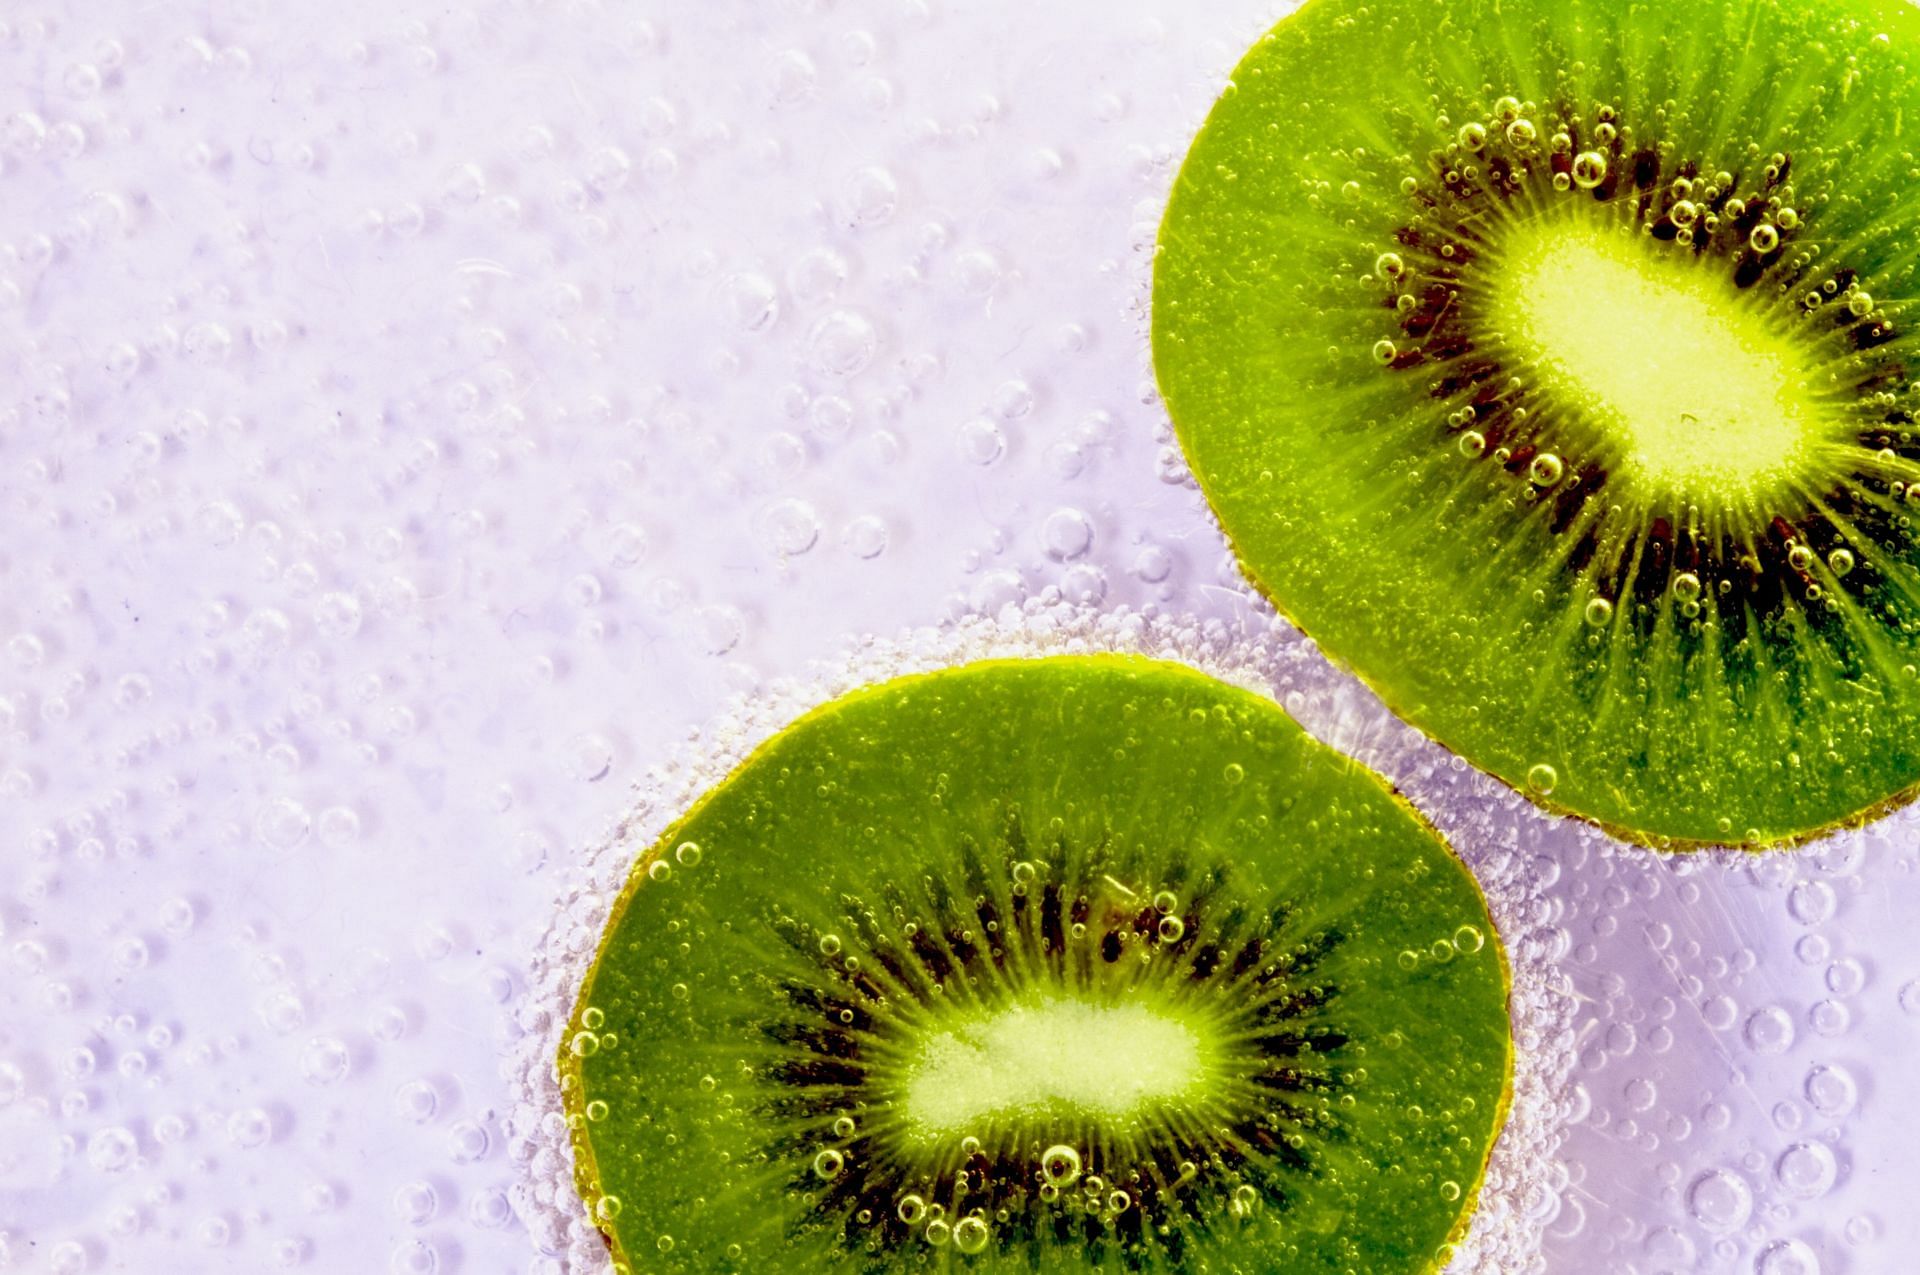 Benefit Of Kiwi In Our Life (Image Via Pexels)